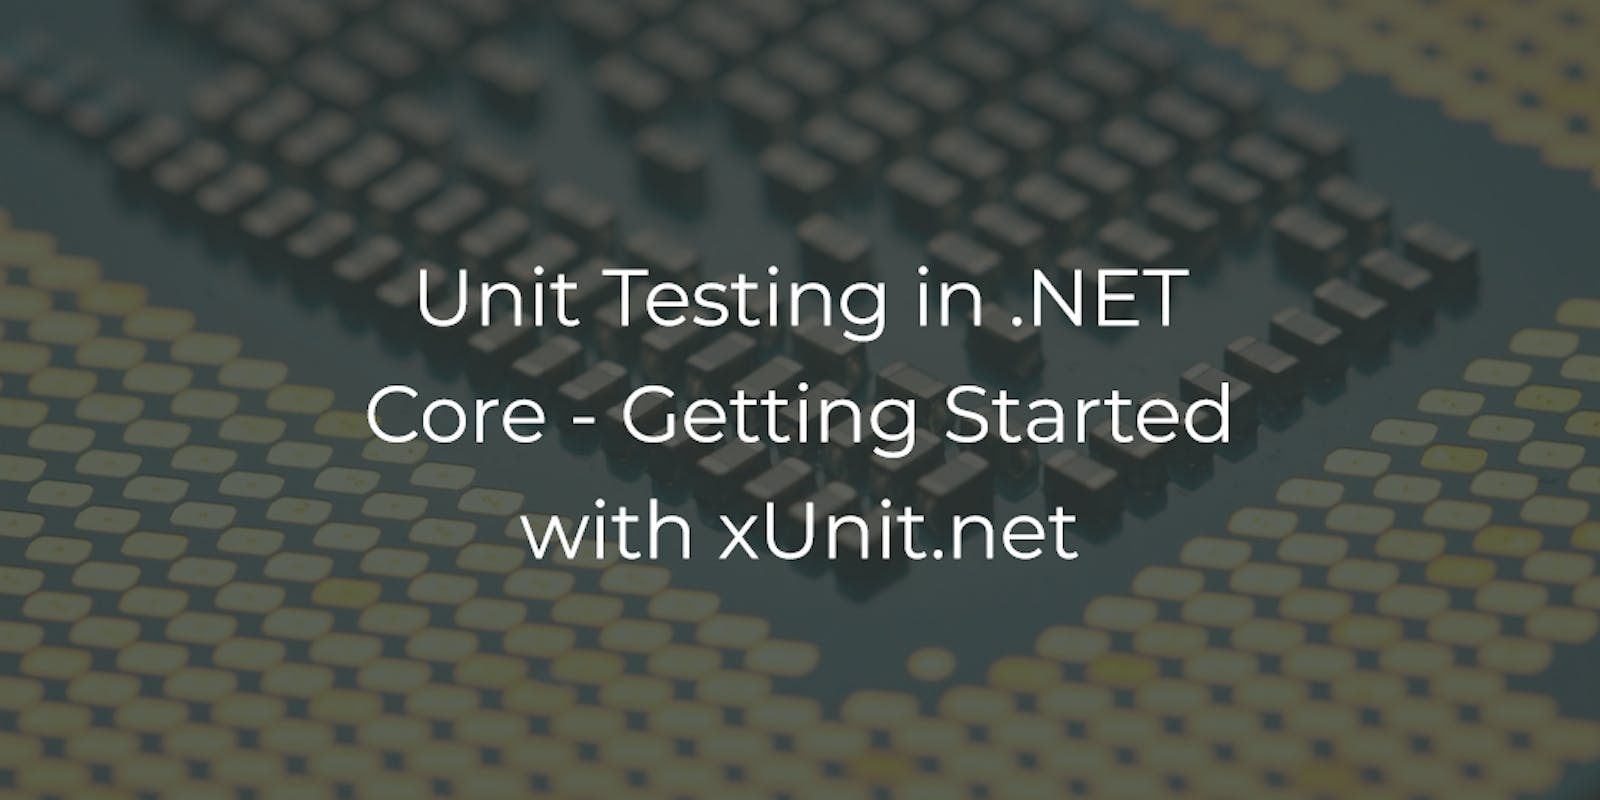 Unit Testing in .NET Core - Getting Started with xUnit.net